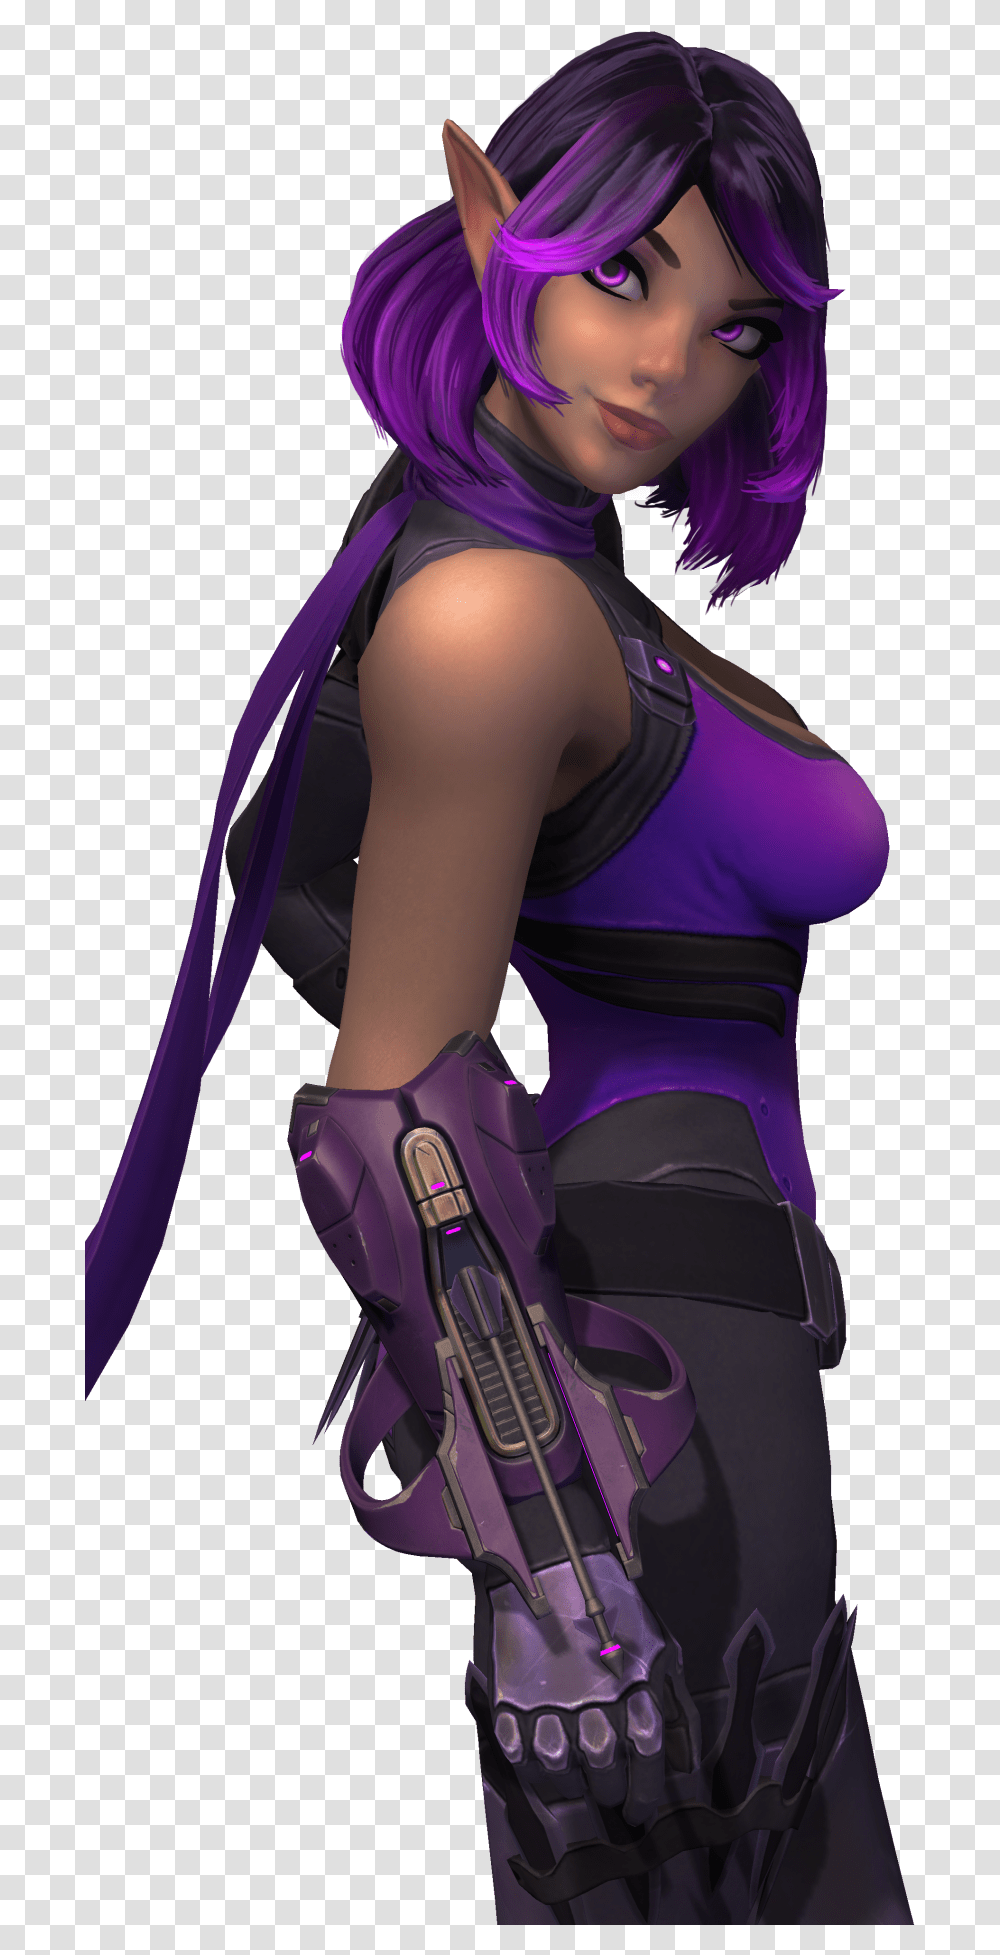 Video Paladins Skye, Clothing, Person, Costume, Overwatch Transparent Png